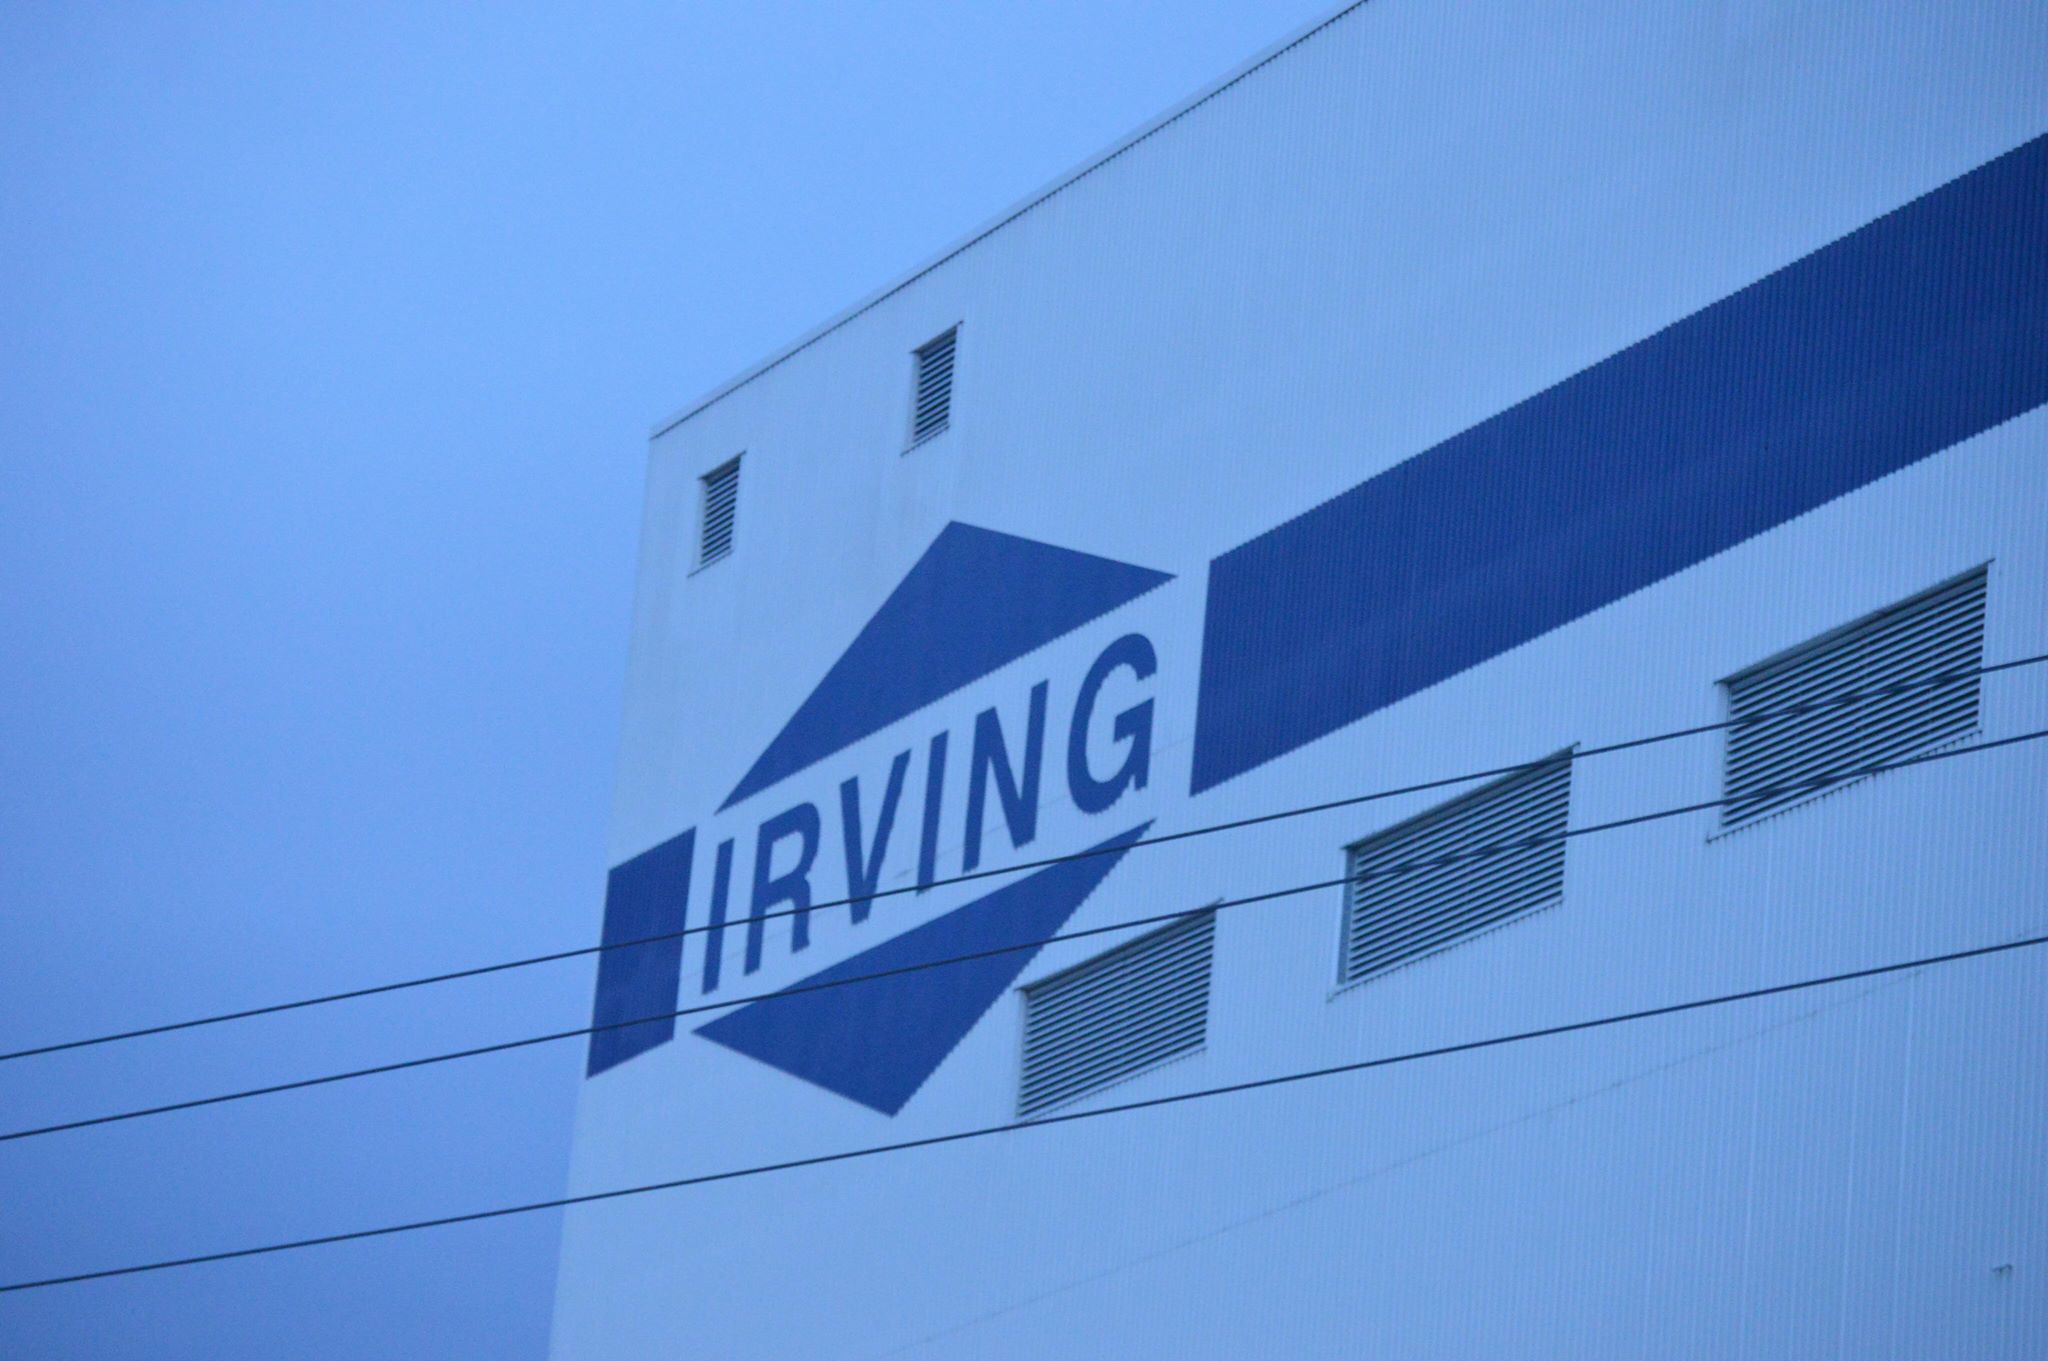 Irving Shipbuilding worker struck by piece of equipment, died at scene: police